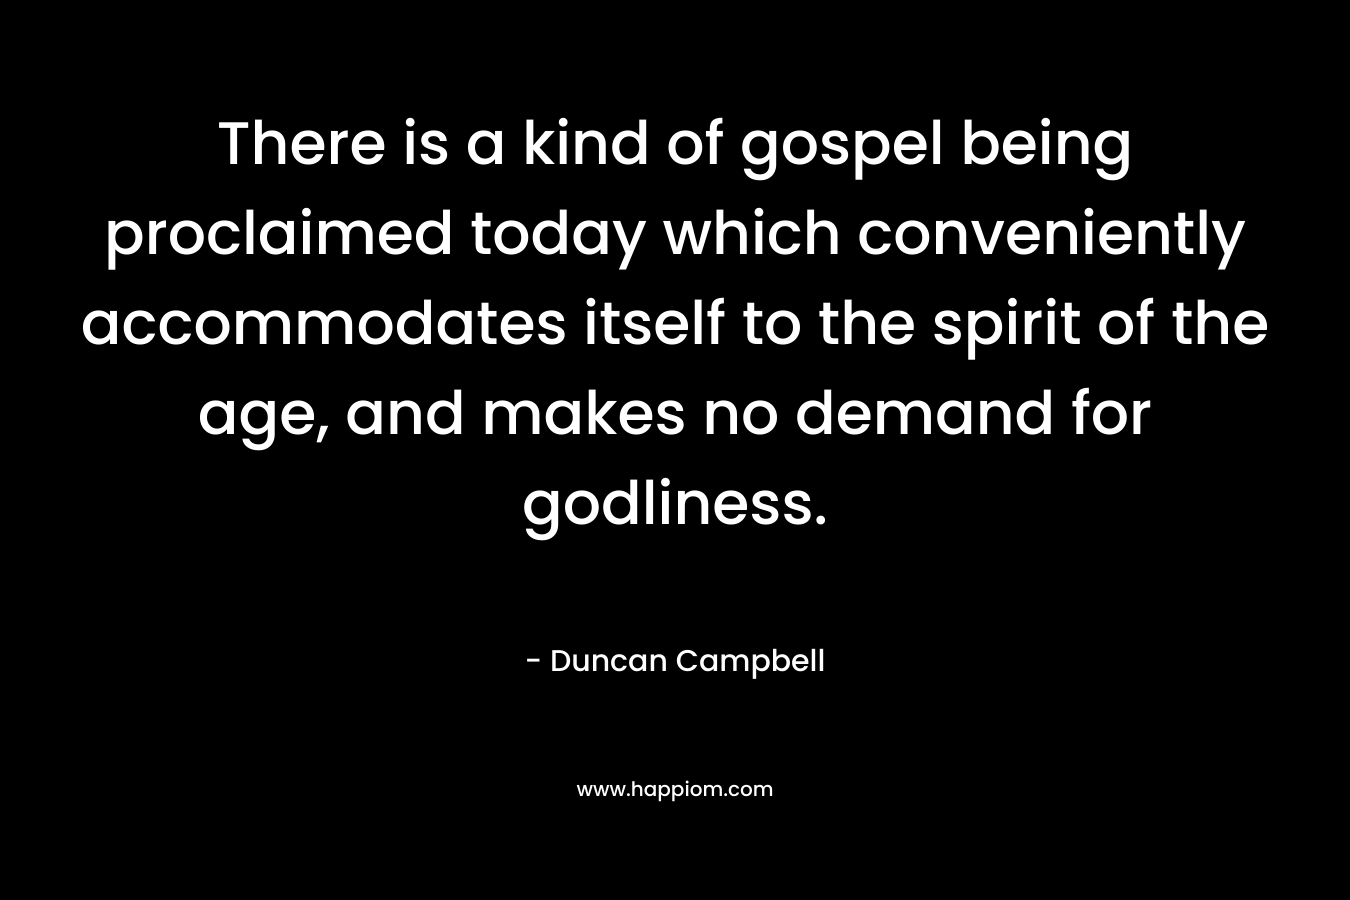 There is a kind of gospel being proclaimed today which conveniently accommodates itself to the spirit of the age, and makes no demand for godliness.